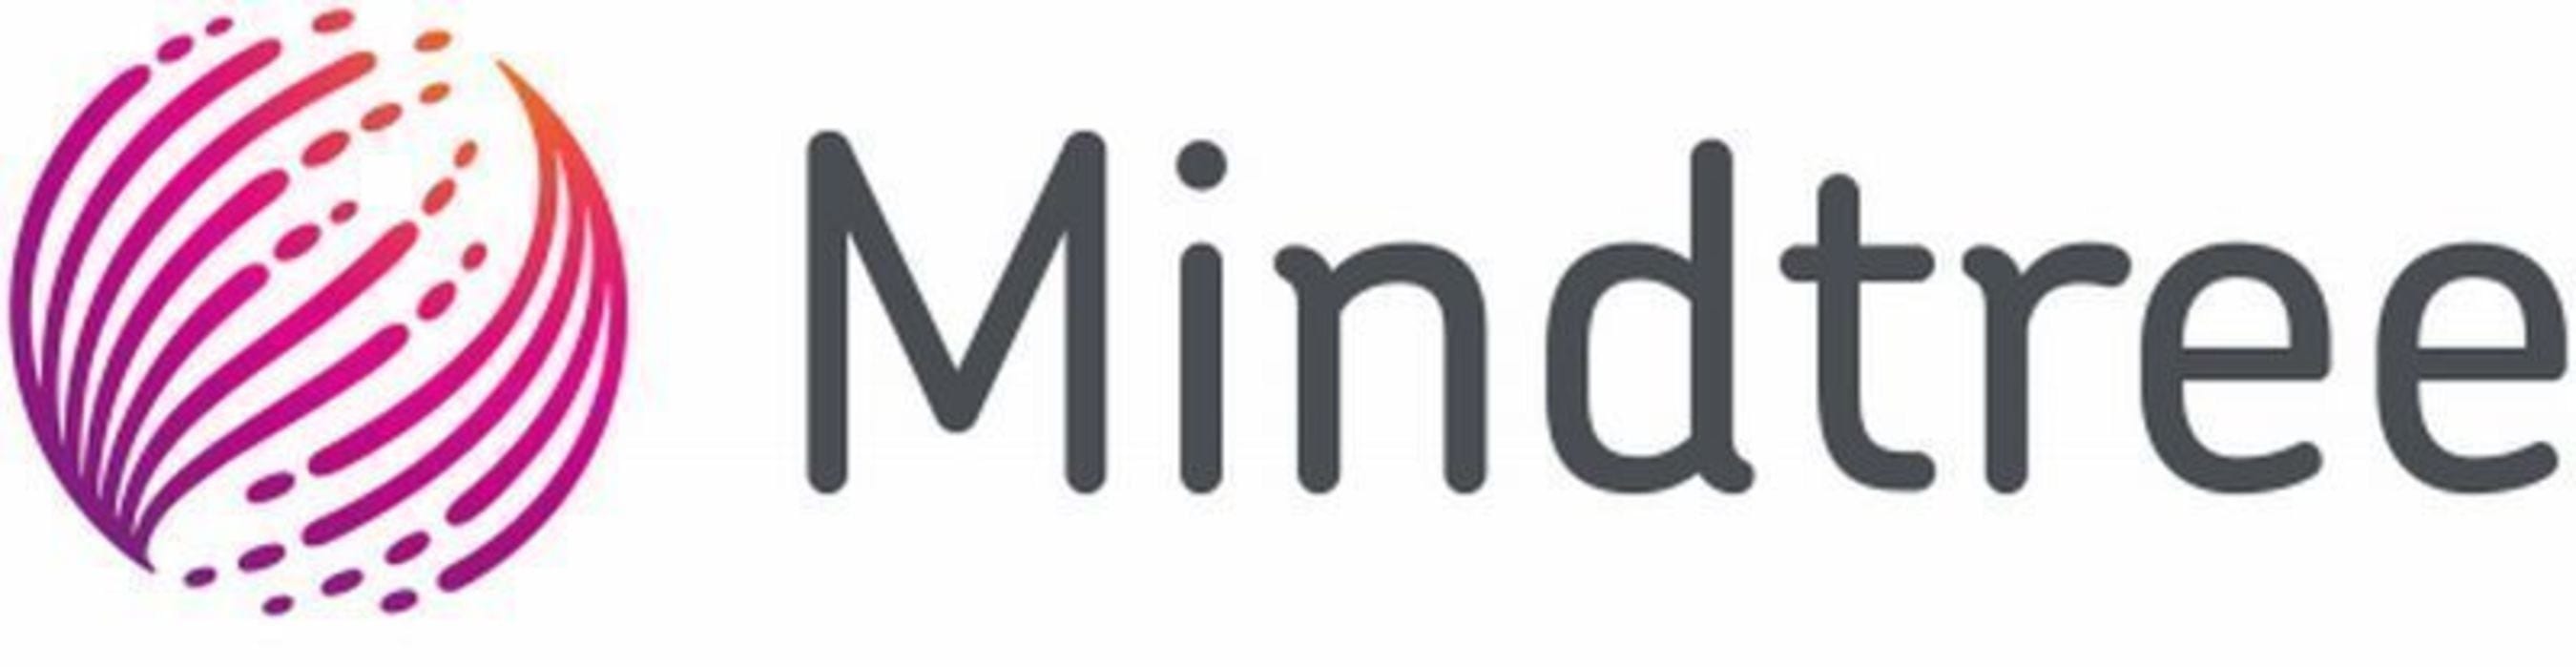 Mindtree Partners with the Indian Institute of Science Bangalore to Advance Research in Artificial Intelligence